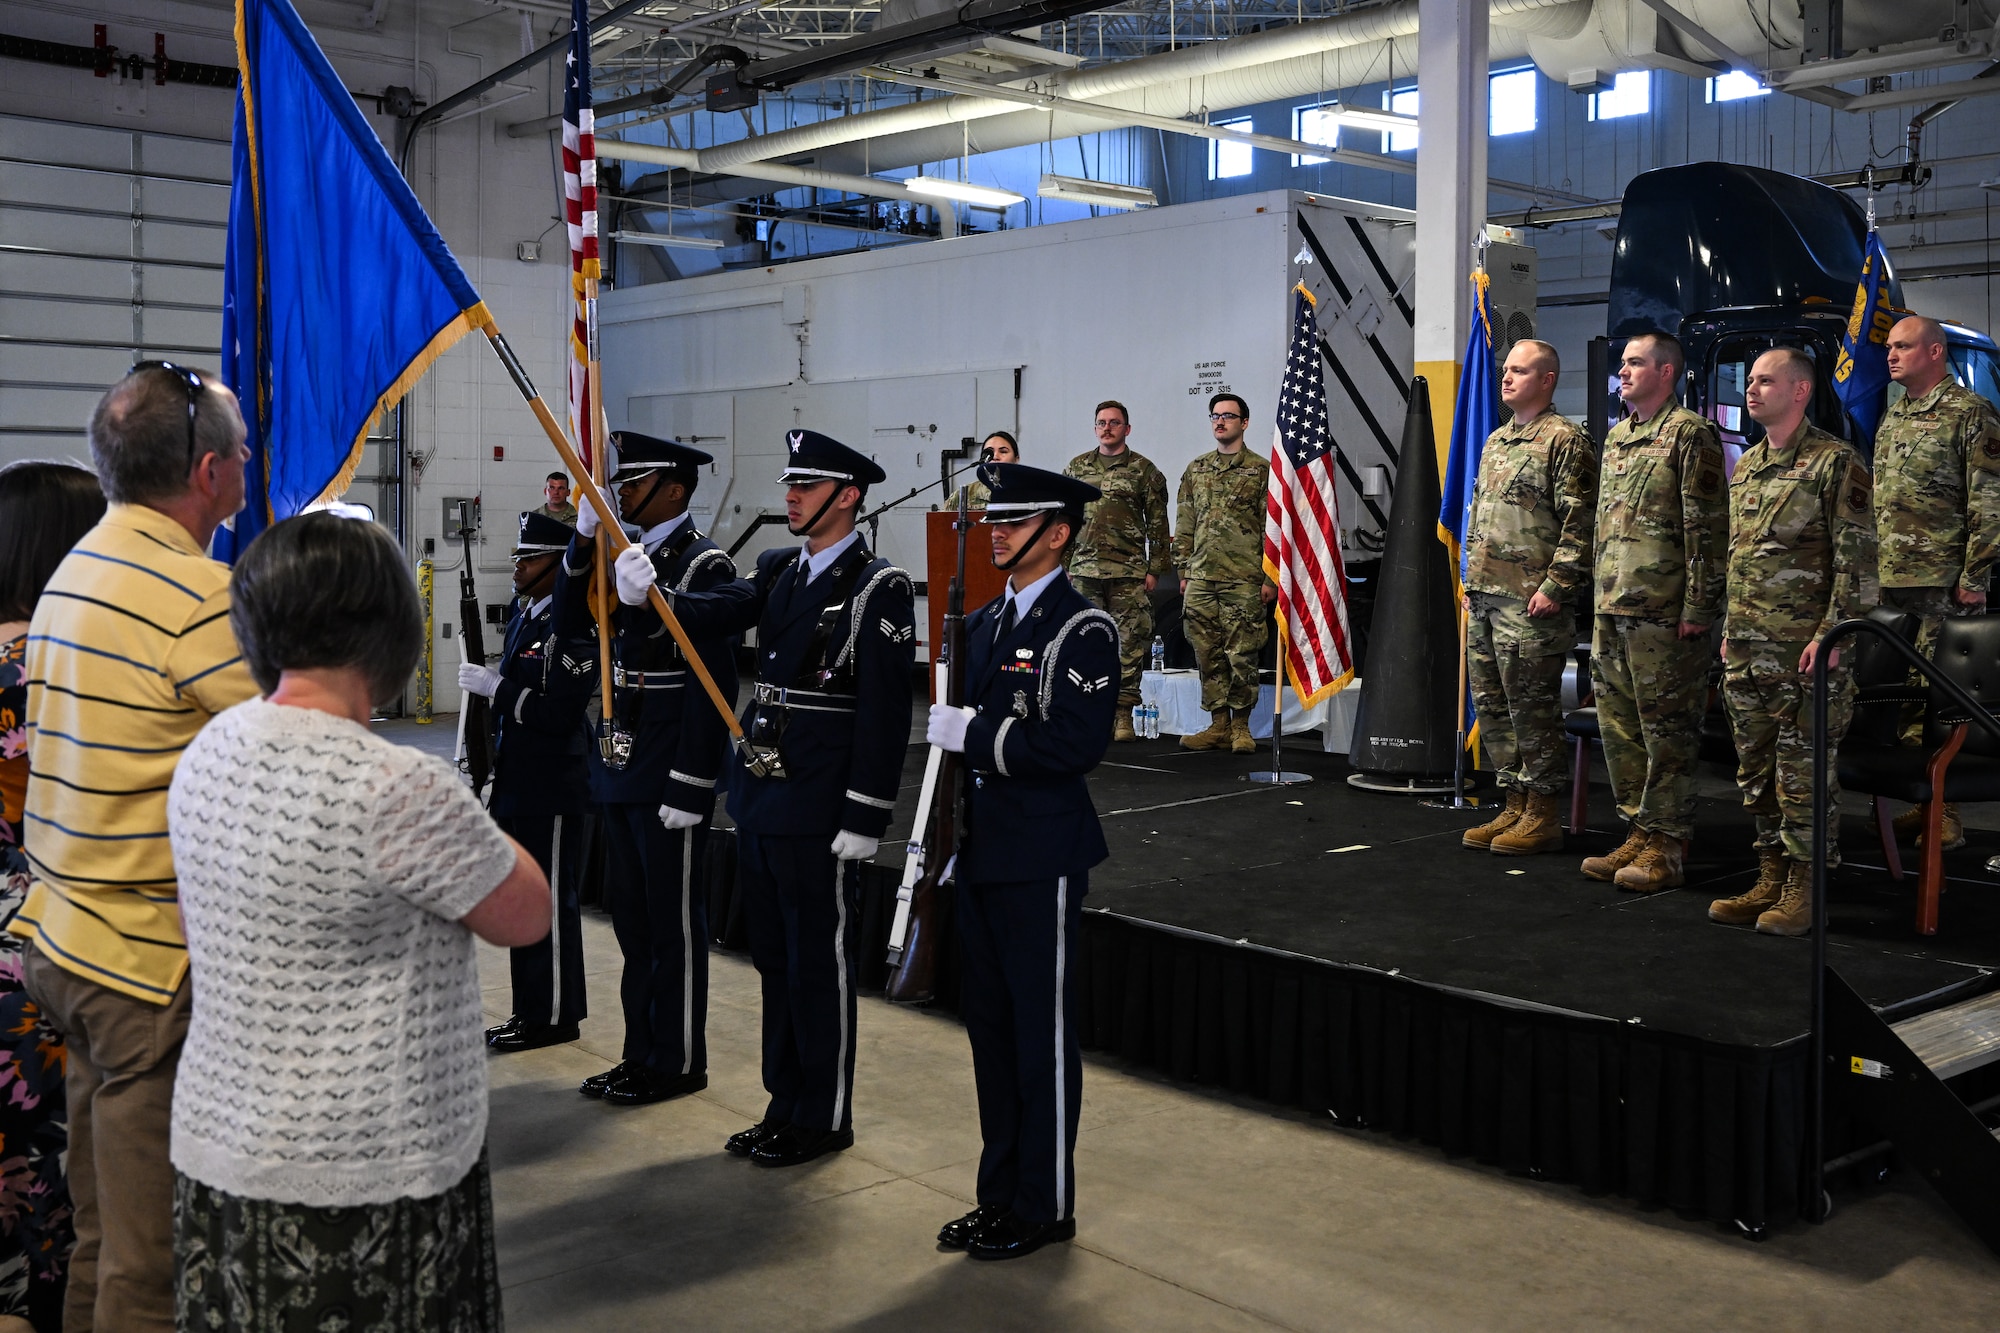 The 90th Missile Wing Color Guard post the colors during the 90th Munitions Squadron Change of Command Ceremony on F.E. Warren Air Force Base, Wyoming, May 30, 2023. A change of command represents a formal transfer of authority and responsibility from the outgoing commander to the incoming commander. (U.S. Air Force photo by Joseph Coslett Jr.)